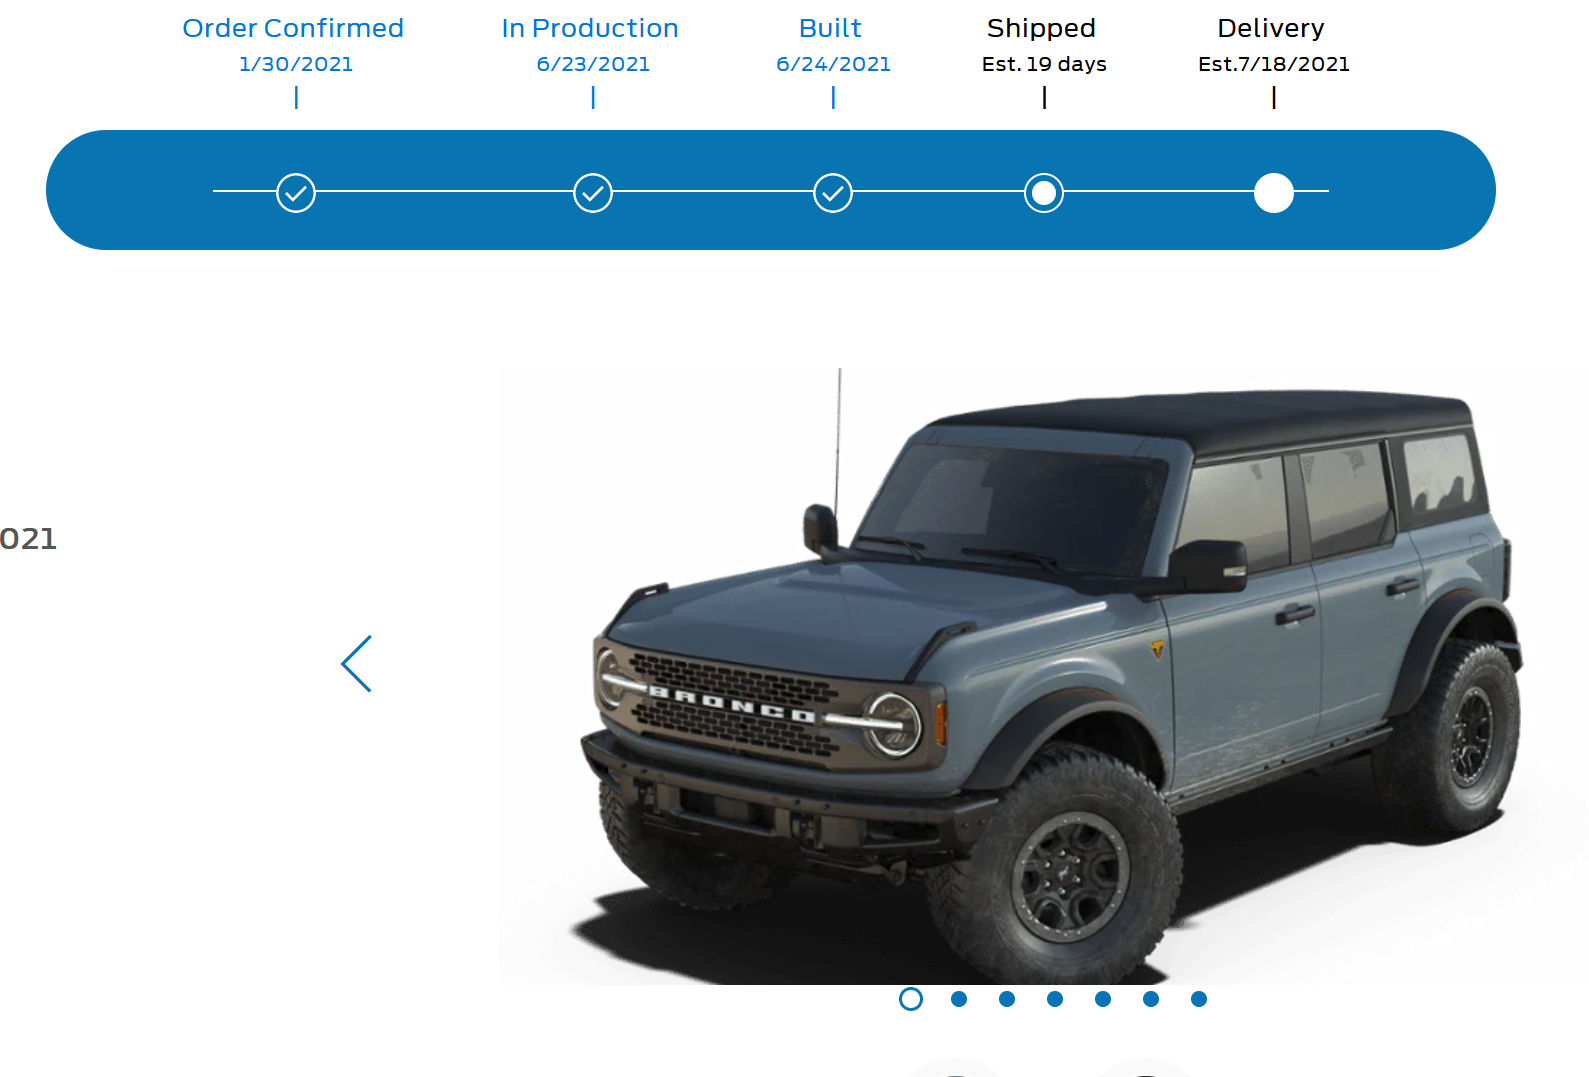 Ford Bronco Just Updated to "In Production" but no estimated delivery date - average time for those of you who have taken delivery? 1624788181975